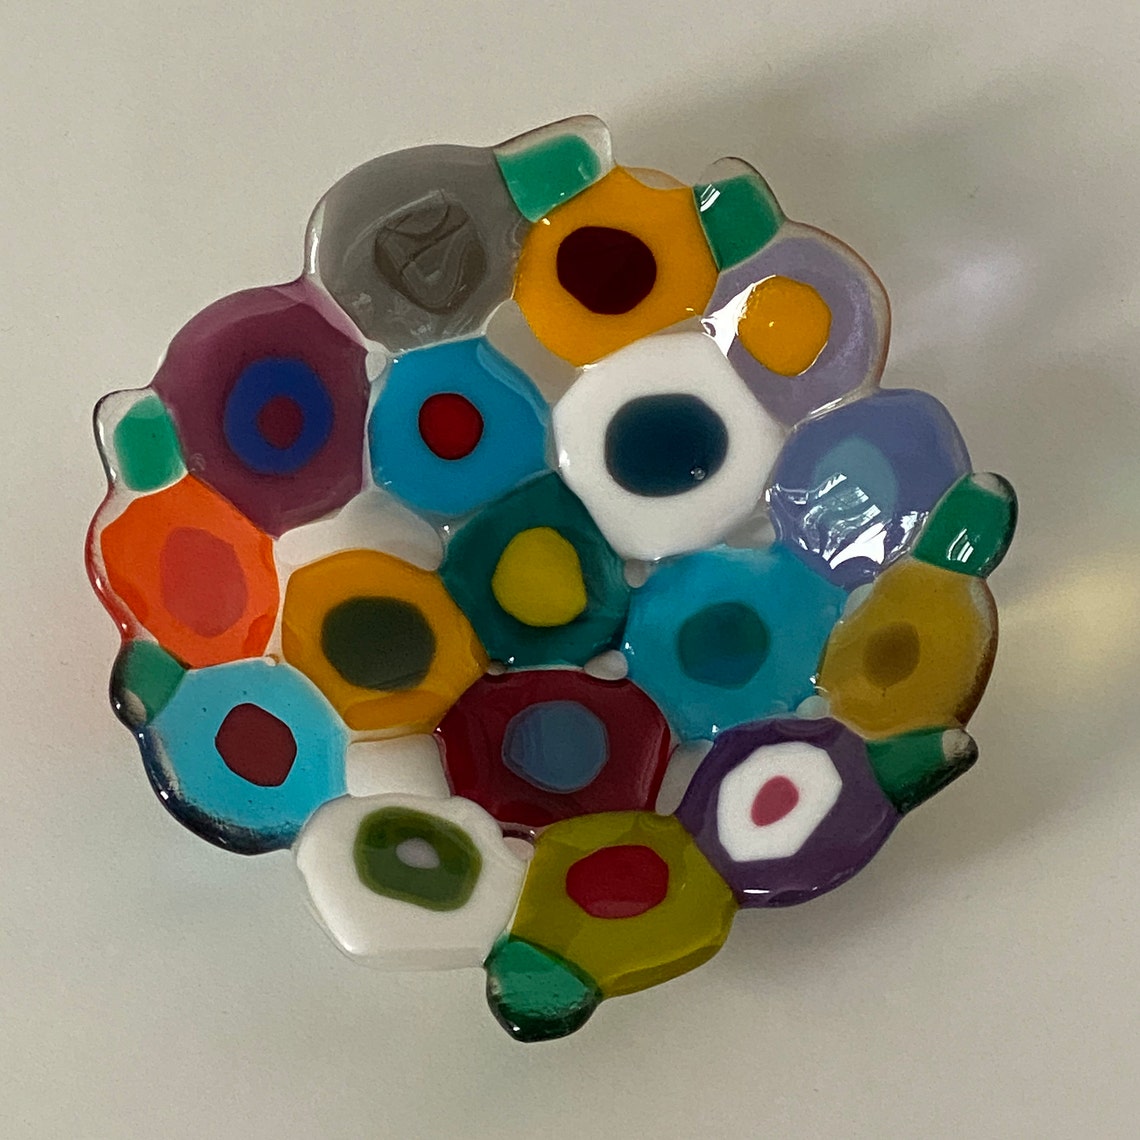 Colorful Handmade Fused Glass Flower Bowl 6 Inches Etsy